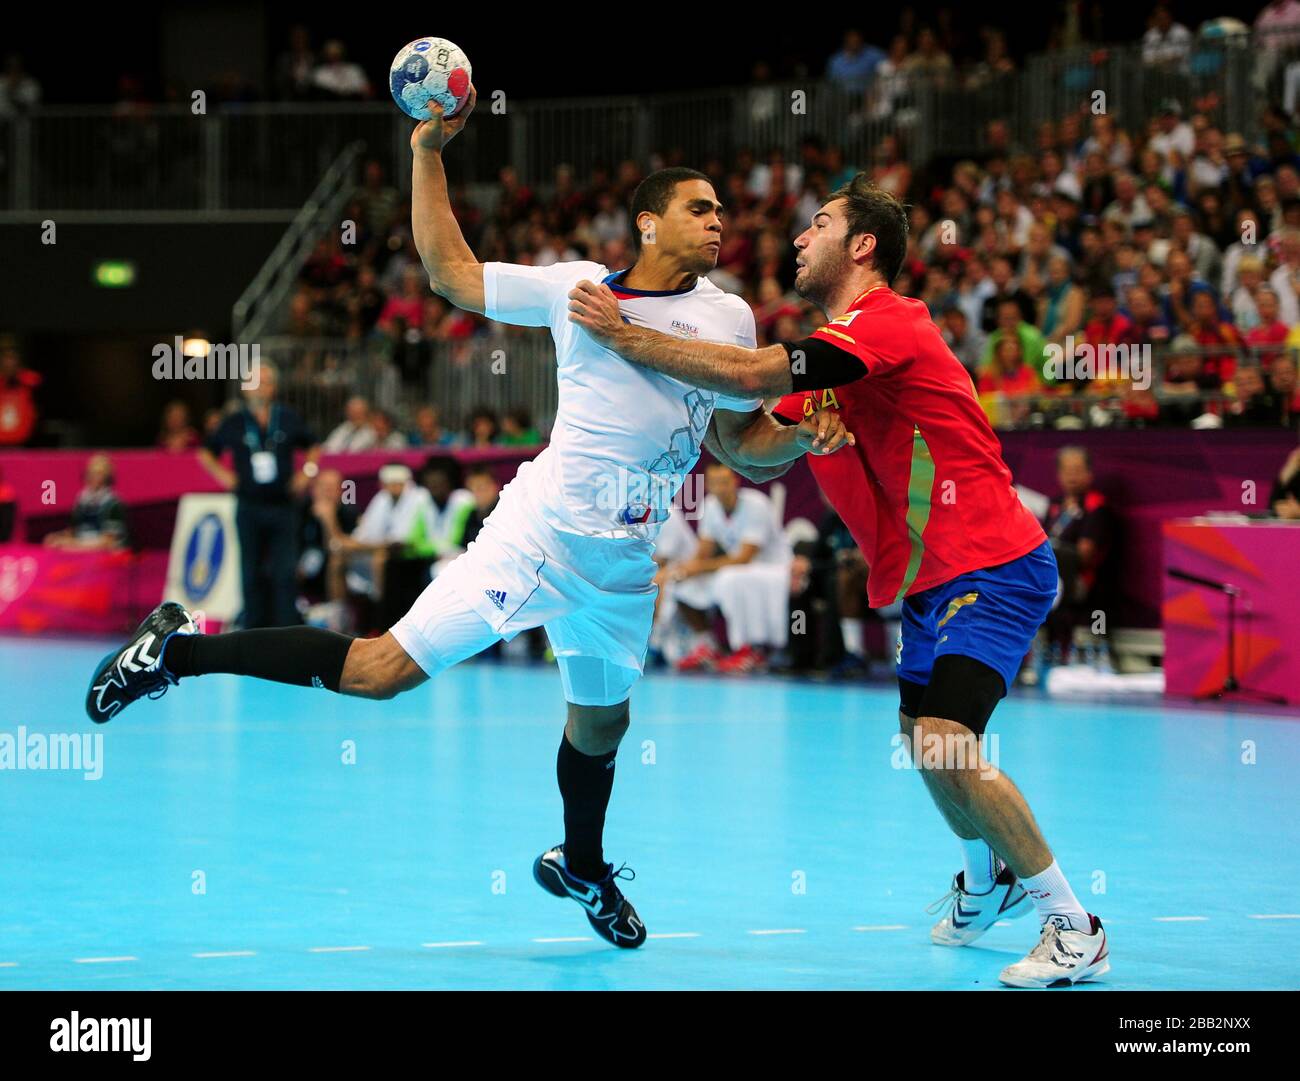 France's Daniel Narcisse (left) and Spain's Reixach Canellas during the Handball Men's Quarterfinal match at the Basketball Arena, Olympic Park. London Stock Photo